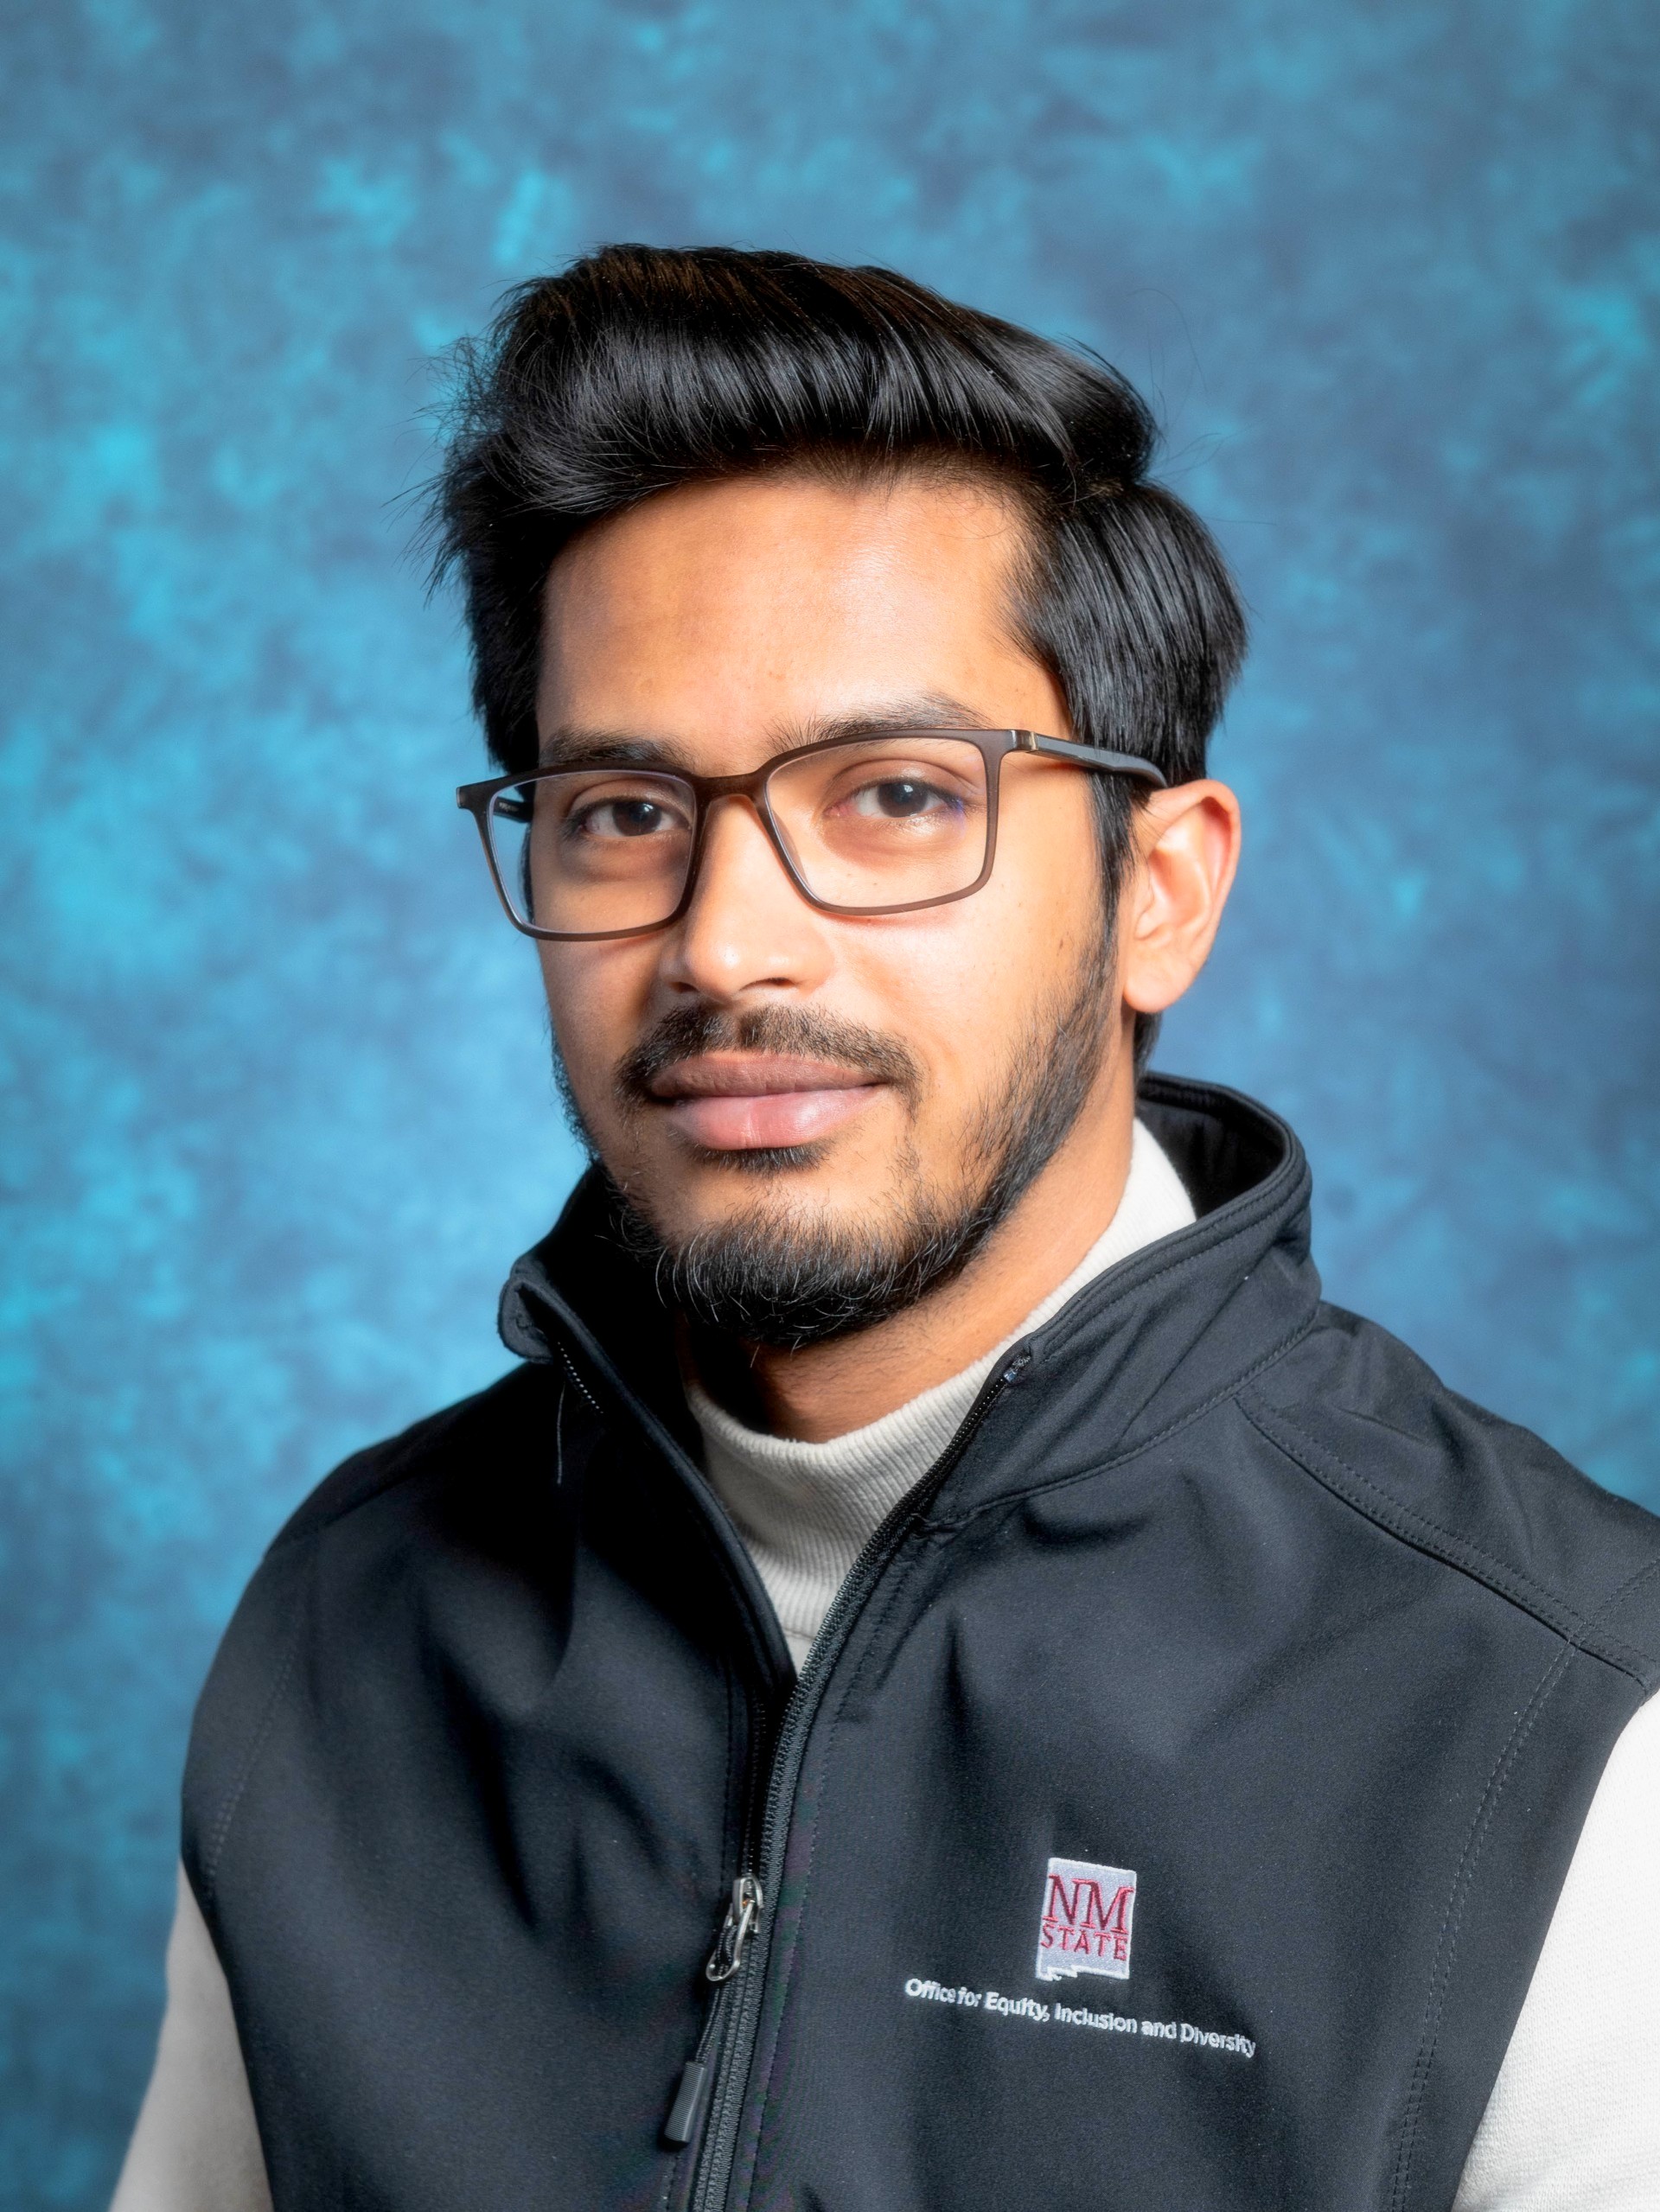 An image of Sarhan Osman Bhuiya, the Graduate Assistant for EID. The image is a head-and-shoulders portrait of a Sarhan against a textured blue background. The person has short, dark hair with a slight wave and a well-groomed beard and mustache. He is wearing rectangular glasses with brown frames and are gazing directly at the camera with a neutral expression. He is dressed in a black zip-up vest over a light gray turtleneck. The vest has an emblem on the left chest area with the text "NM STATE" in maroon and a small patch of additional text in white below it.